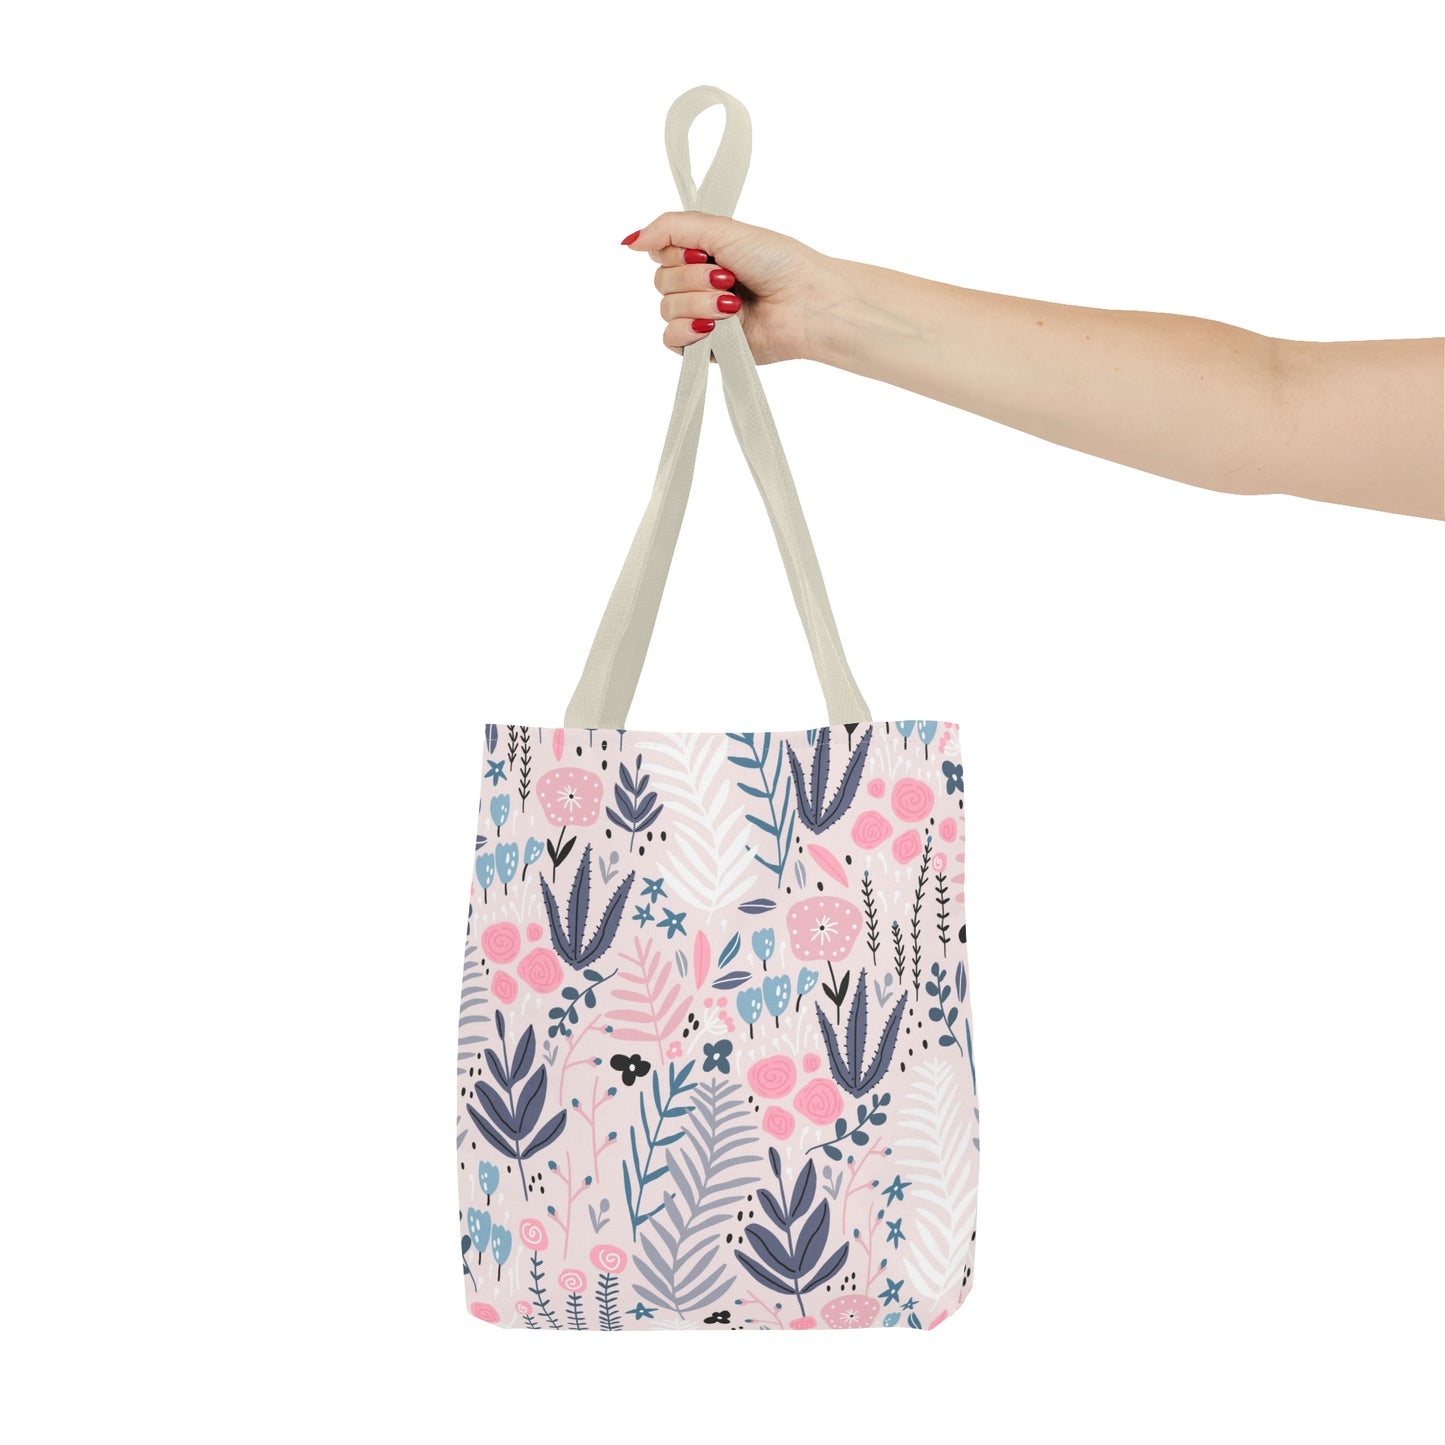 Vibrant Blossom Carryall - Floral Tote Bag